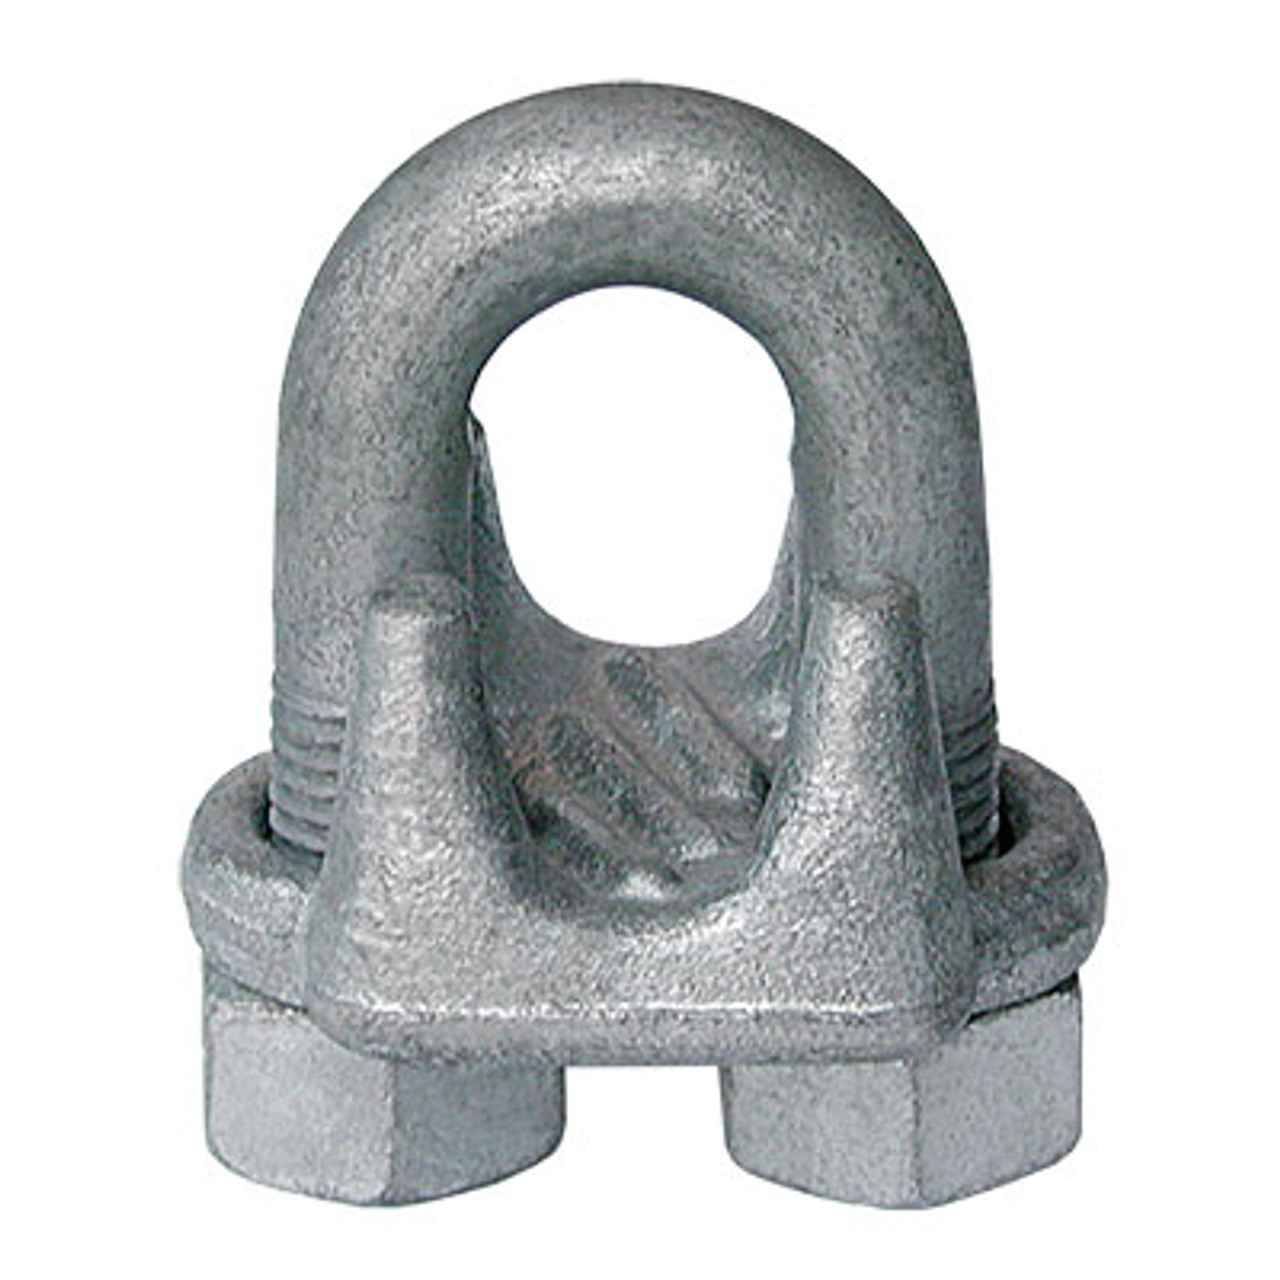 Wire Rope Fist Grip Clip: 3/8 Rope Dia